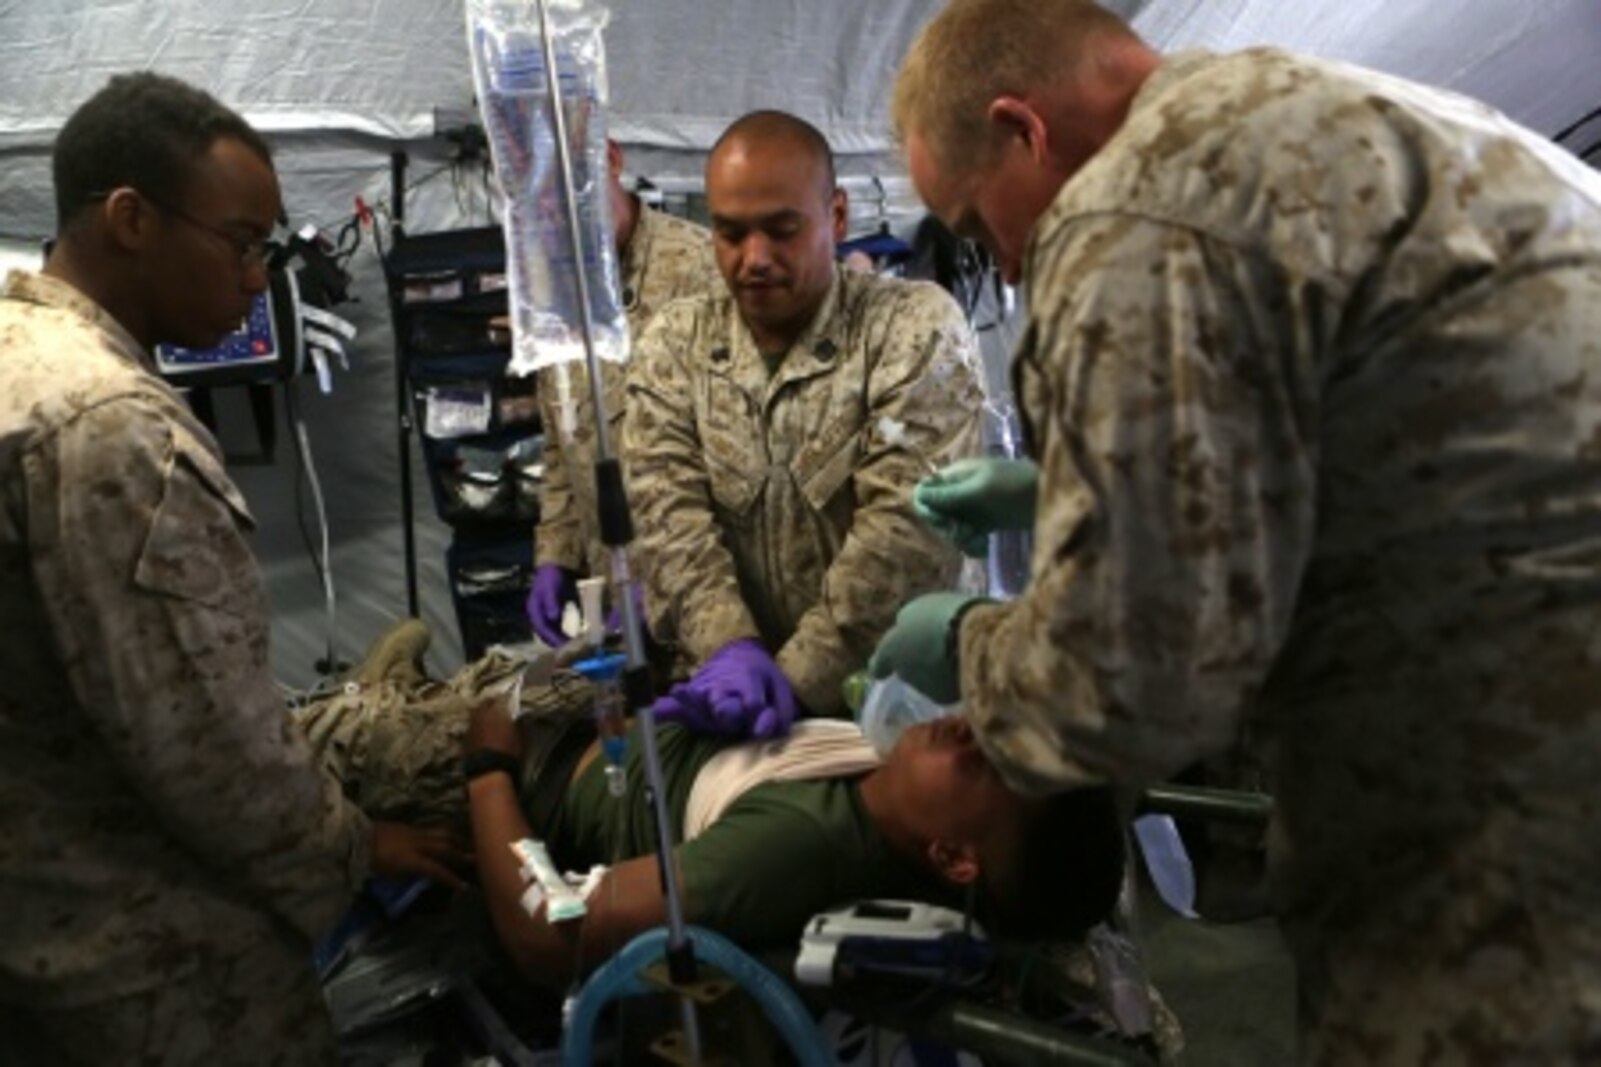 Sailors with Bravo Surgical Company, 1st Medical Battalion, 1st Marine Logistics Group, perform life-saving drills, displaying their medical expeditionary capabilities in support of Marines from 1st Battalion, 5th Marine Regiment, 1st Marine Division, during a mass casualty exercise aboard Camp Pendleton, Calif., Sept 8, 2015 as part of Dawn Blitz 2015.